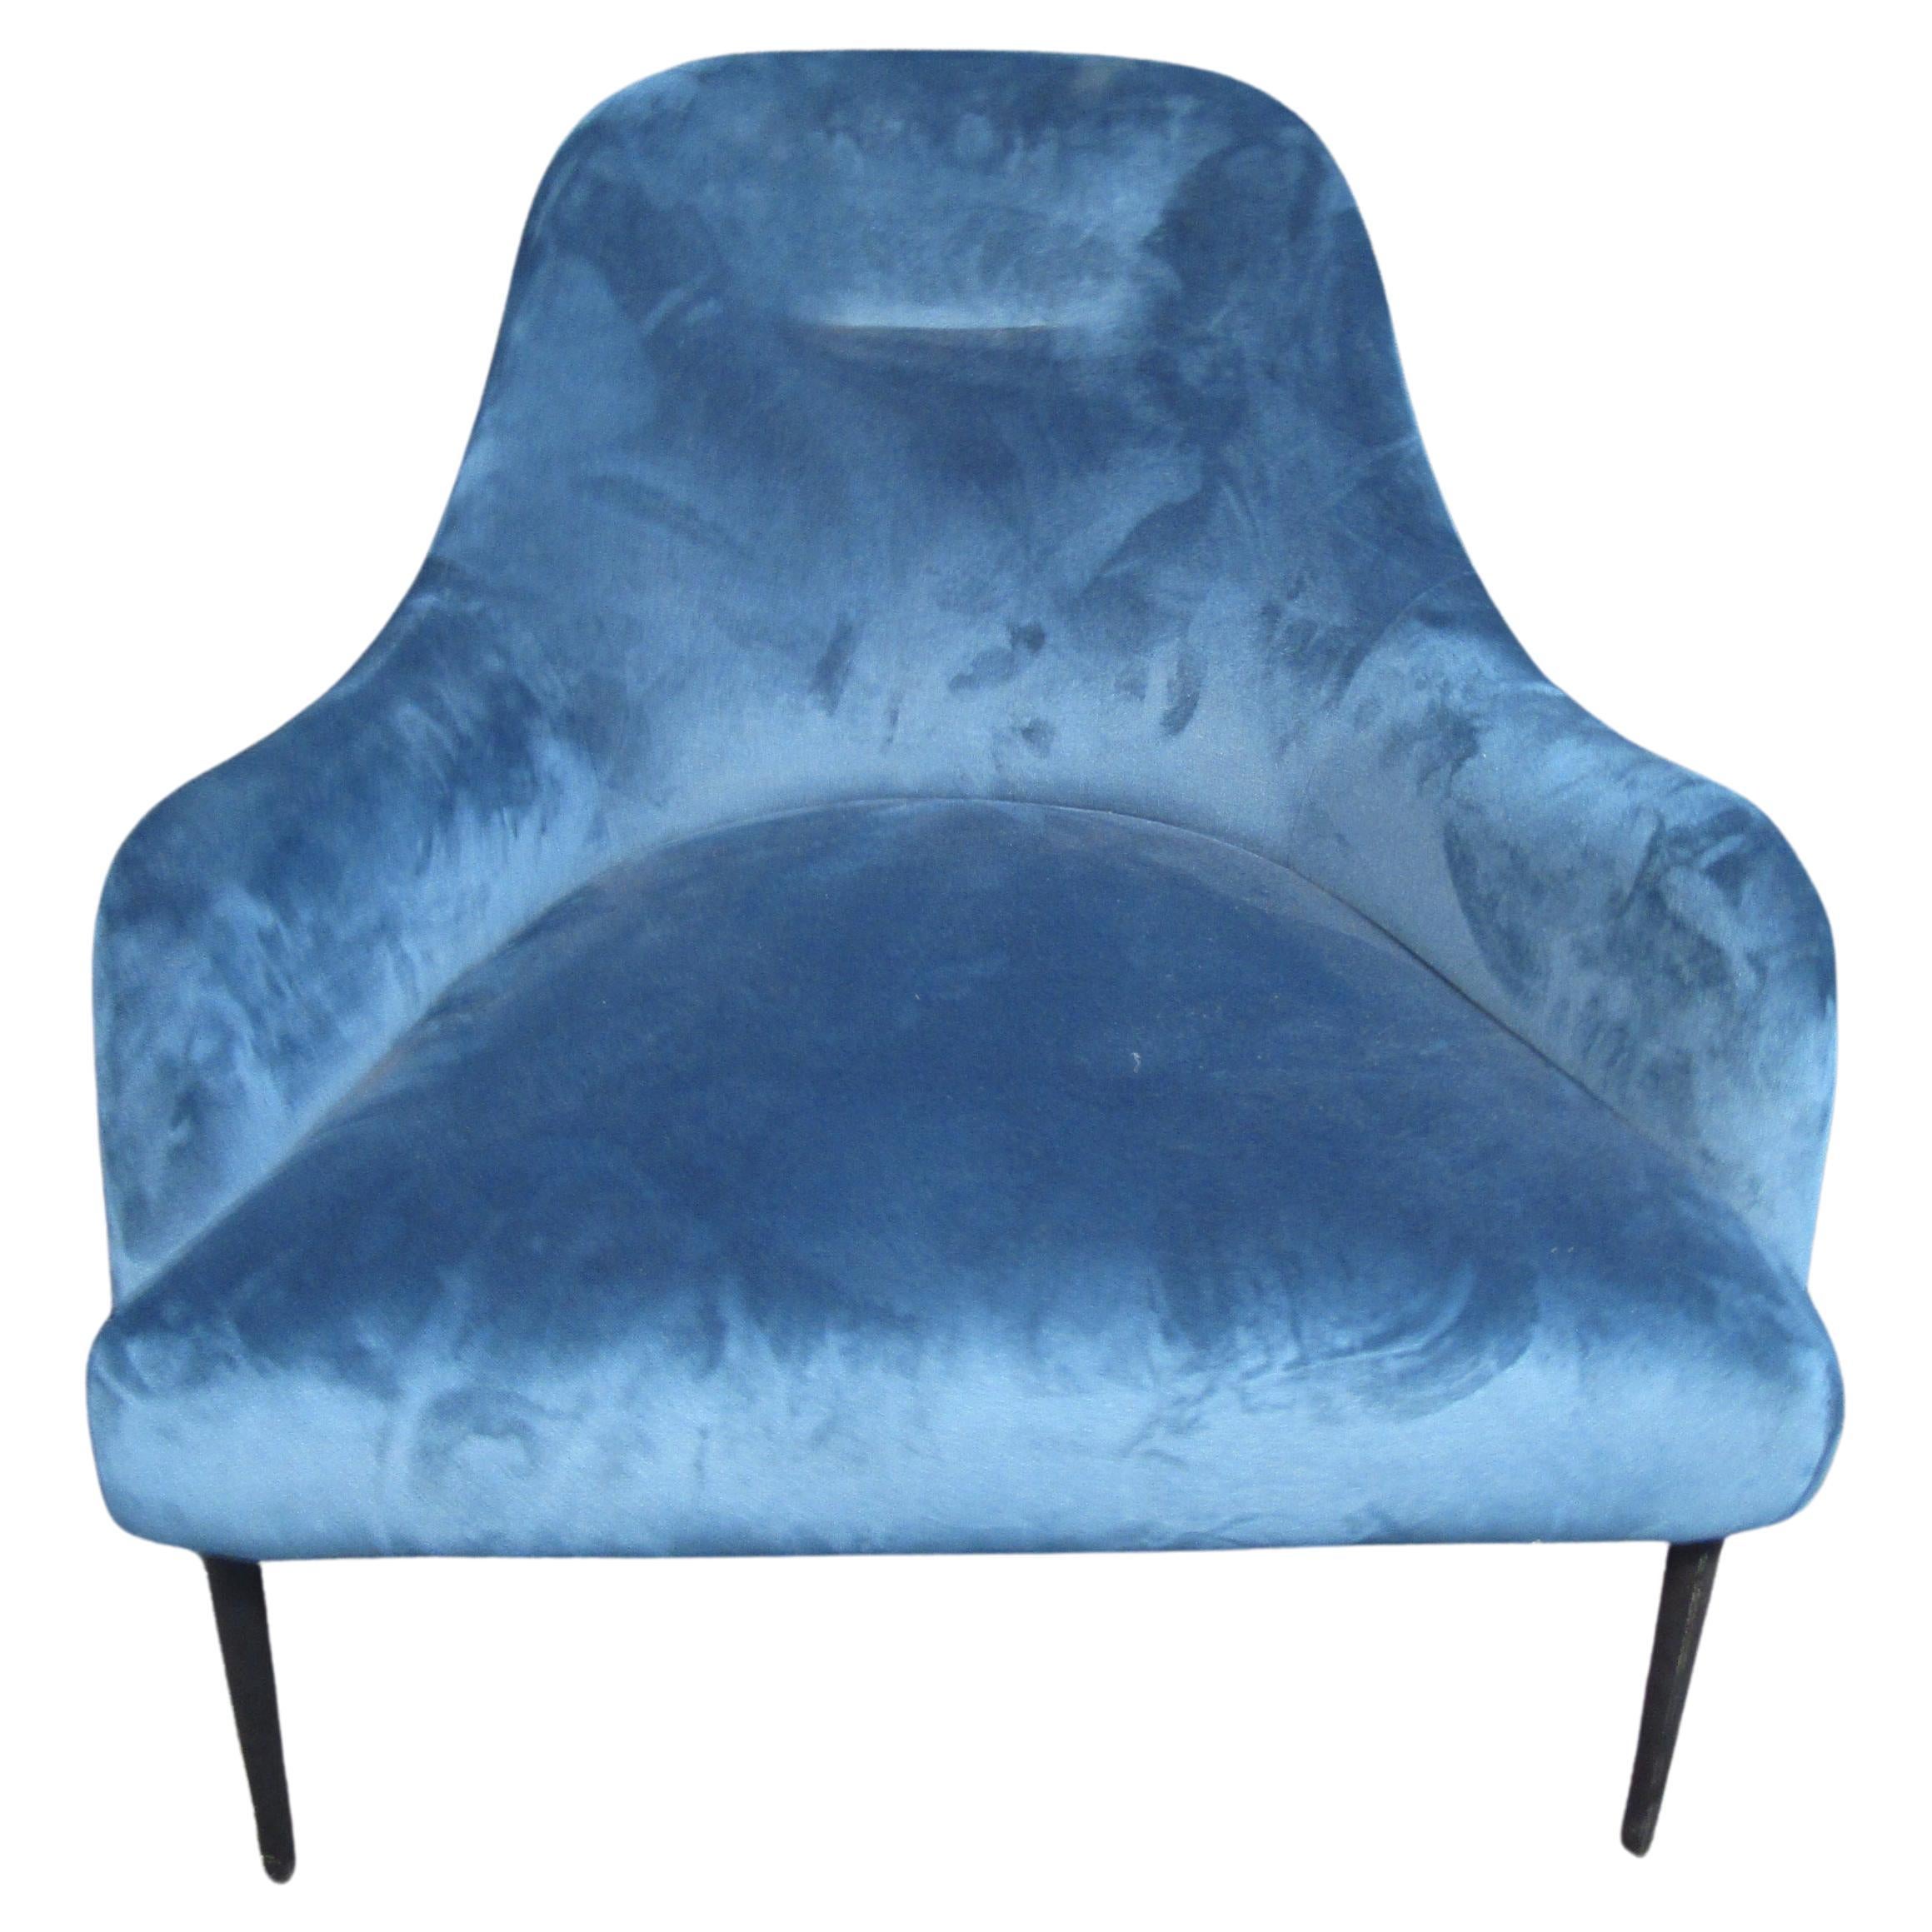 With a comfortable and stylish Mid-Century Modern design, this blue lounge chair adds a pop of color to any interior. Please confirm item location with seller (NY/NJ).